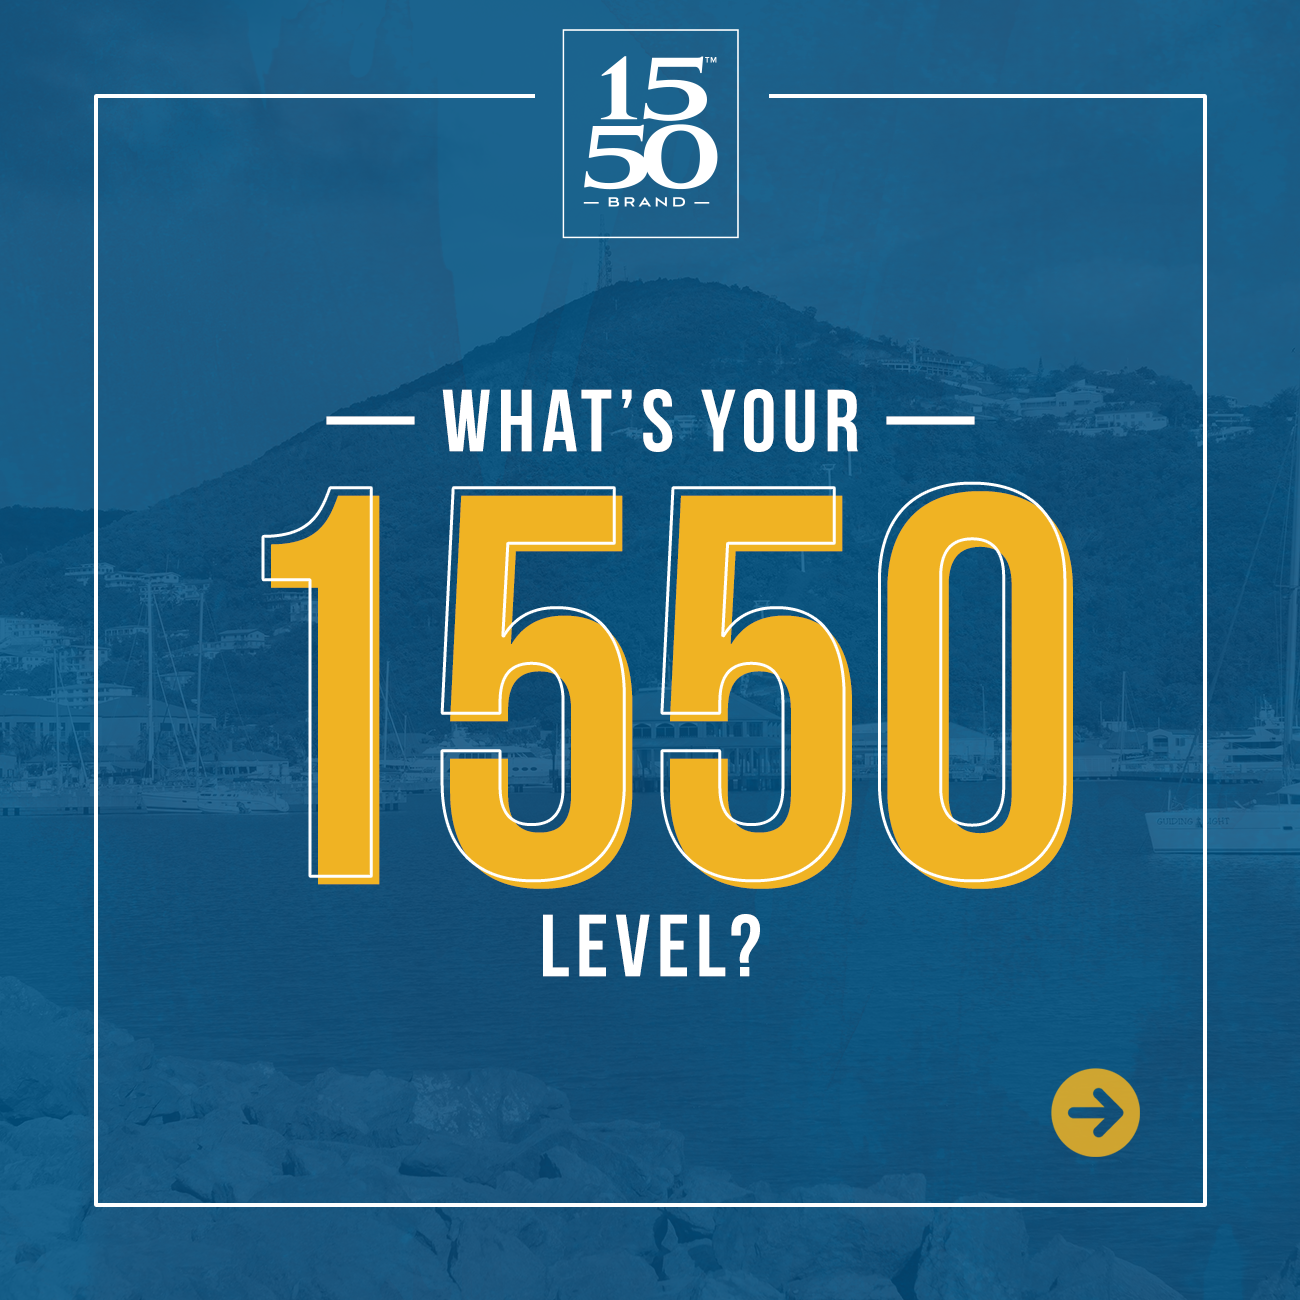 1550-WhatsYour1550Level-1